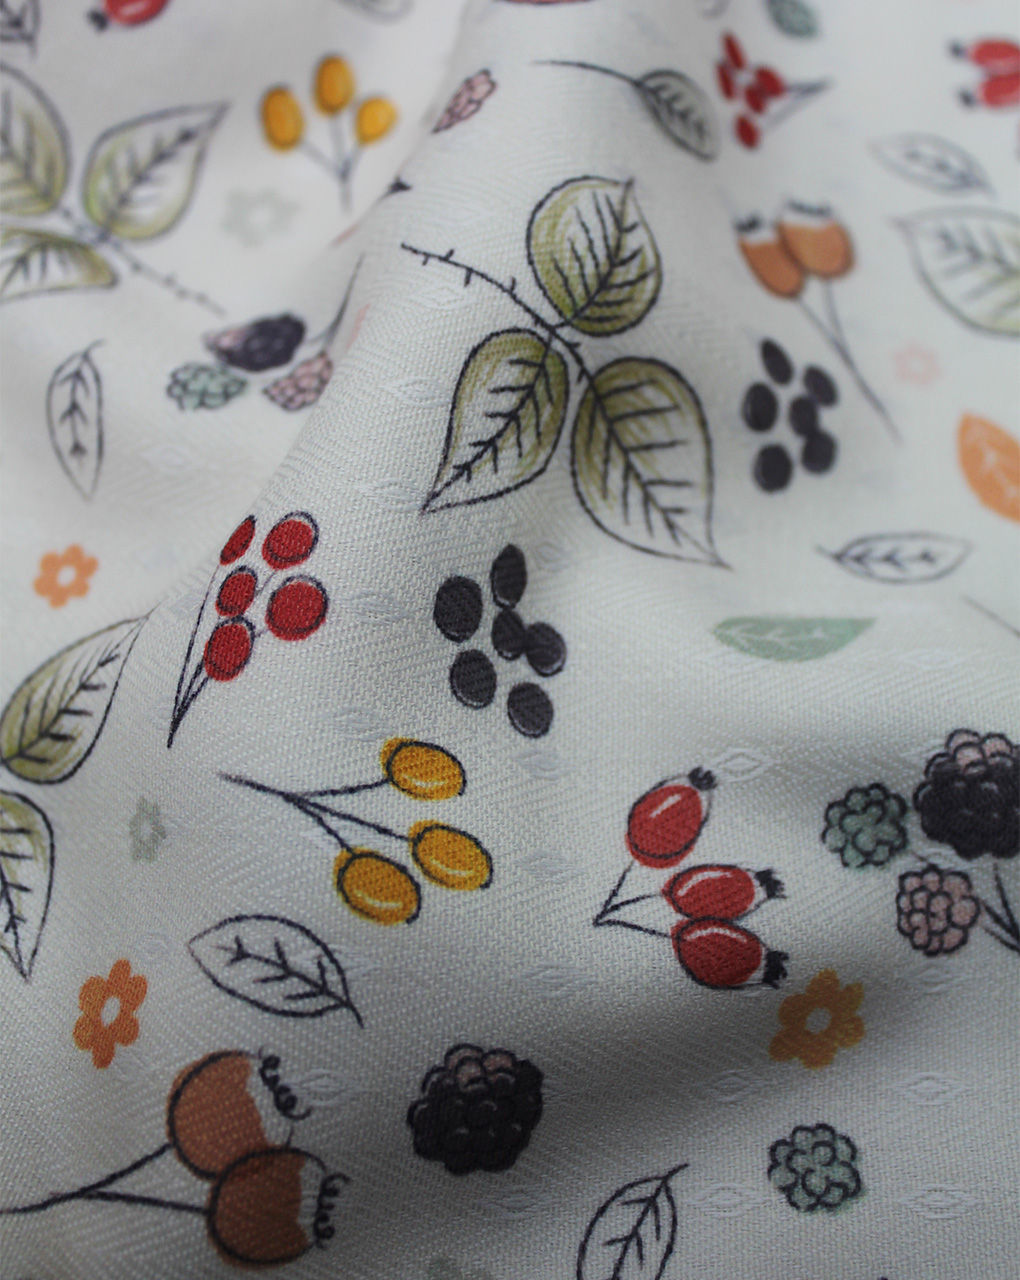 White Floral Design Polyester Printed Fabric